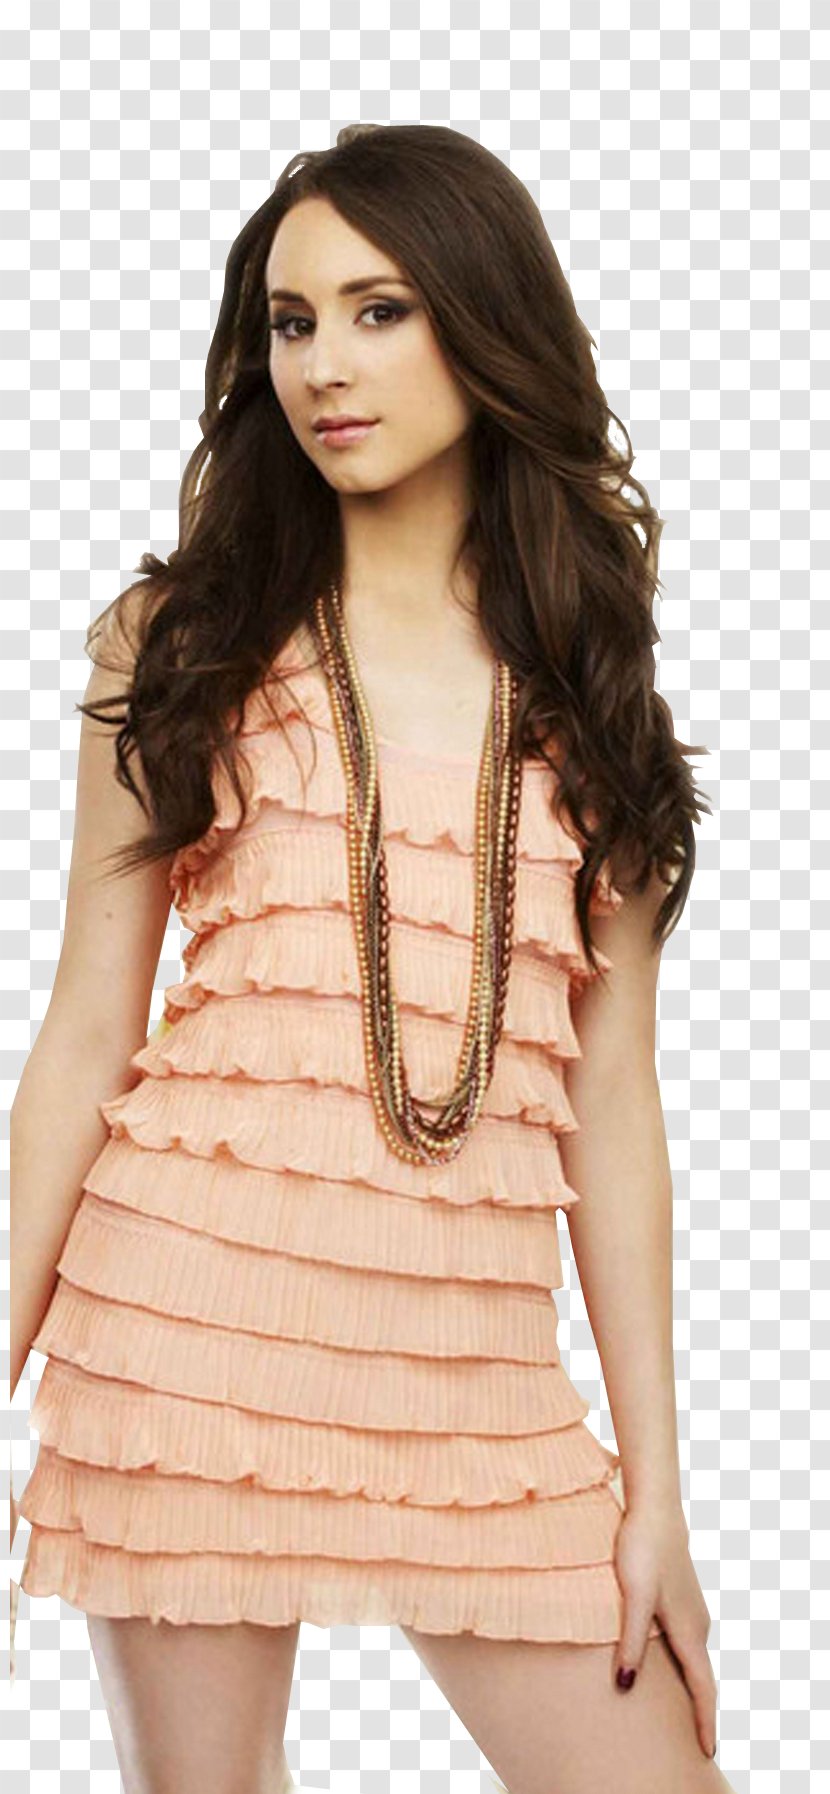 Troian Bellisario Pretty Little Liars Spencer Hastings Emily Fields Artist - Watercolor Transparent PNG